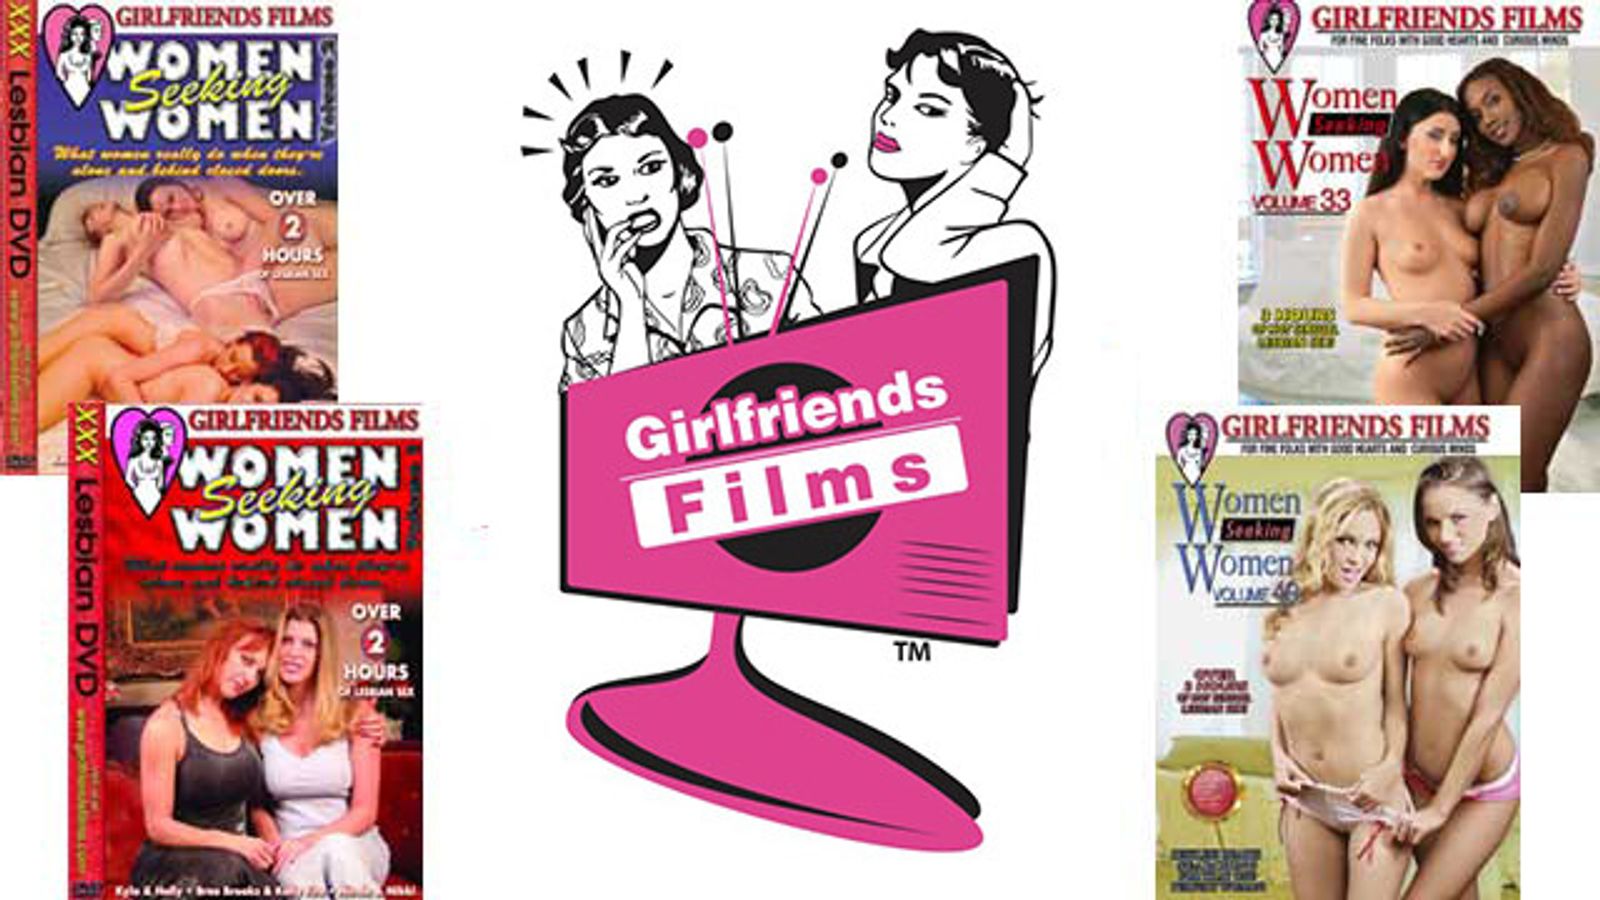 Girlfriends Films Recognized With 8 NightMoves Awards Noms